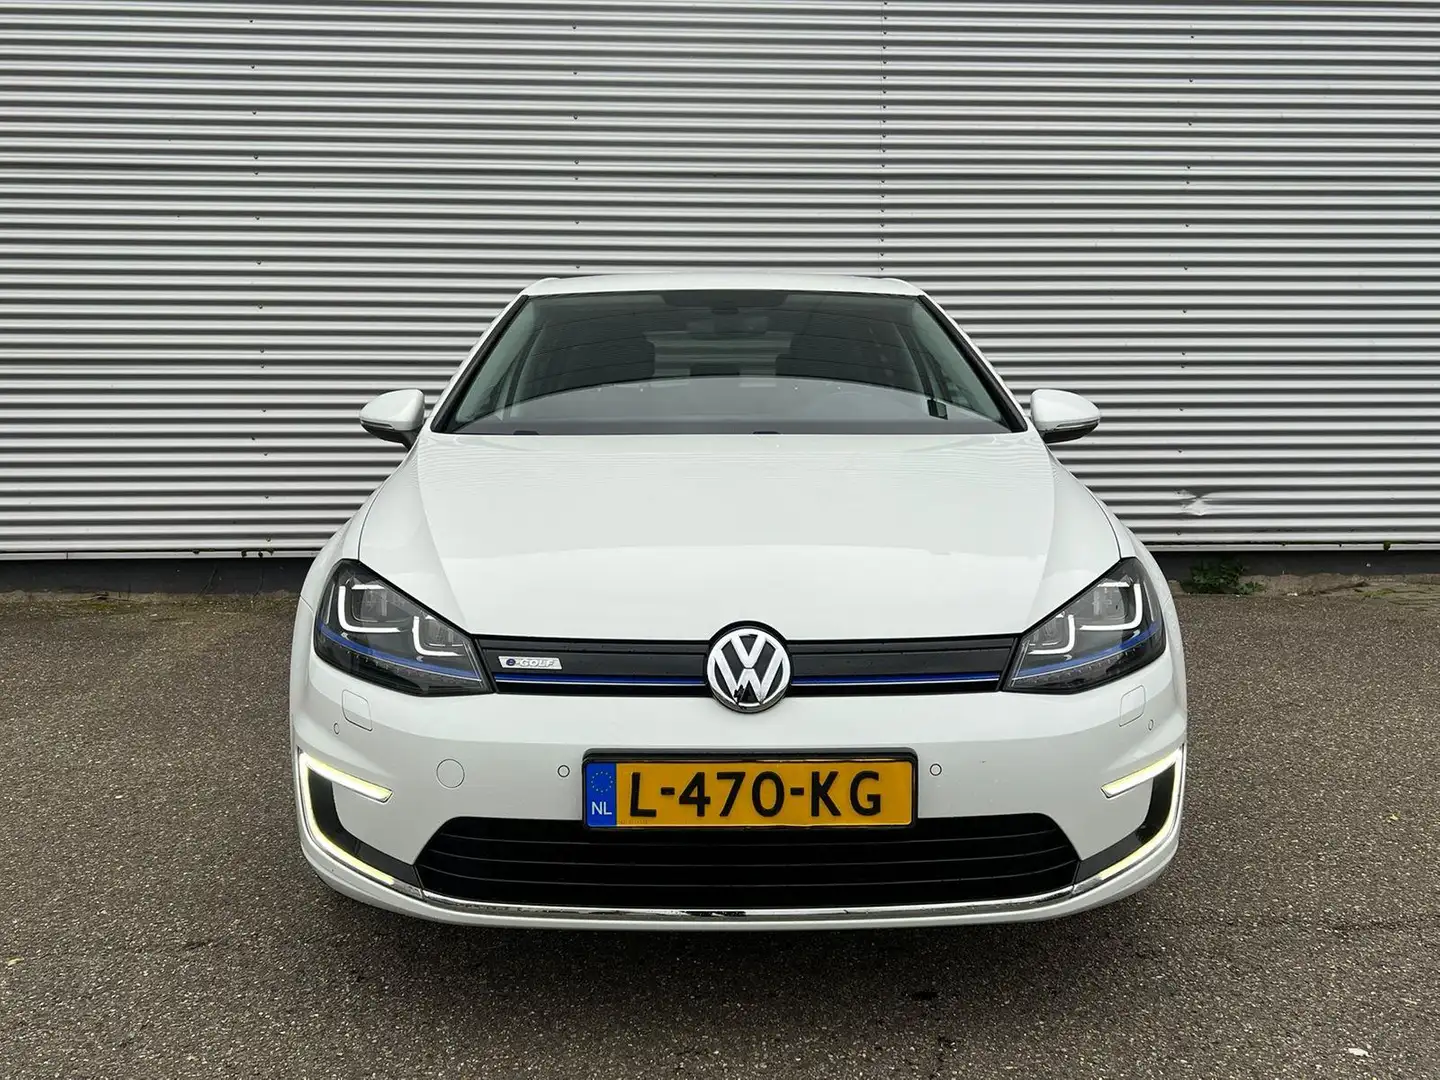 Volkswagen e-Golf € 13.390,- incl. subsidie particulier / camera / a Blanco - 2